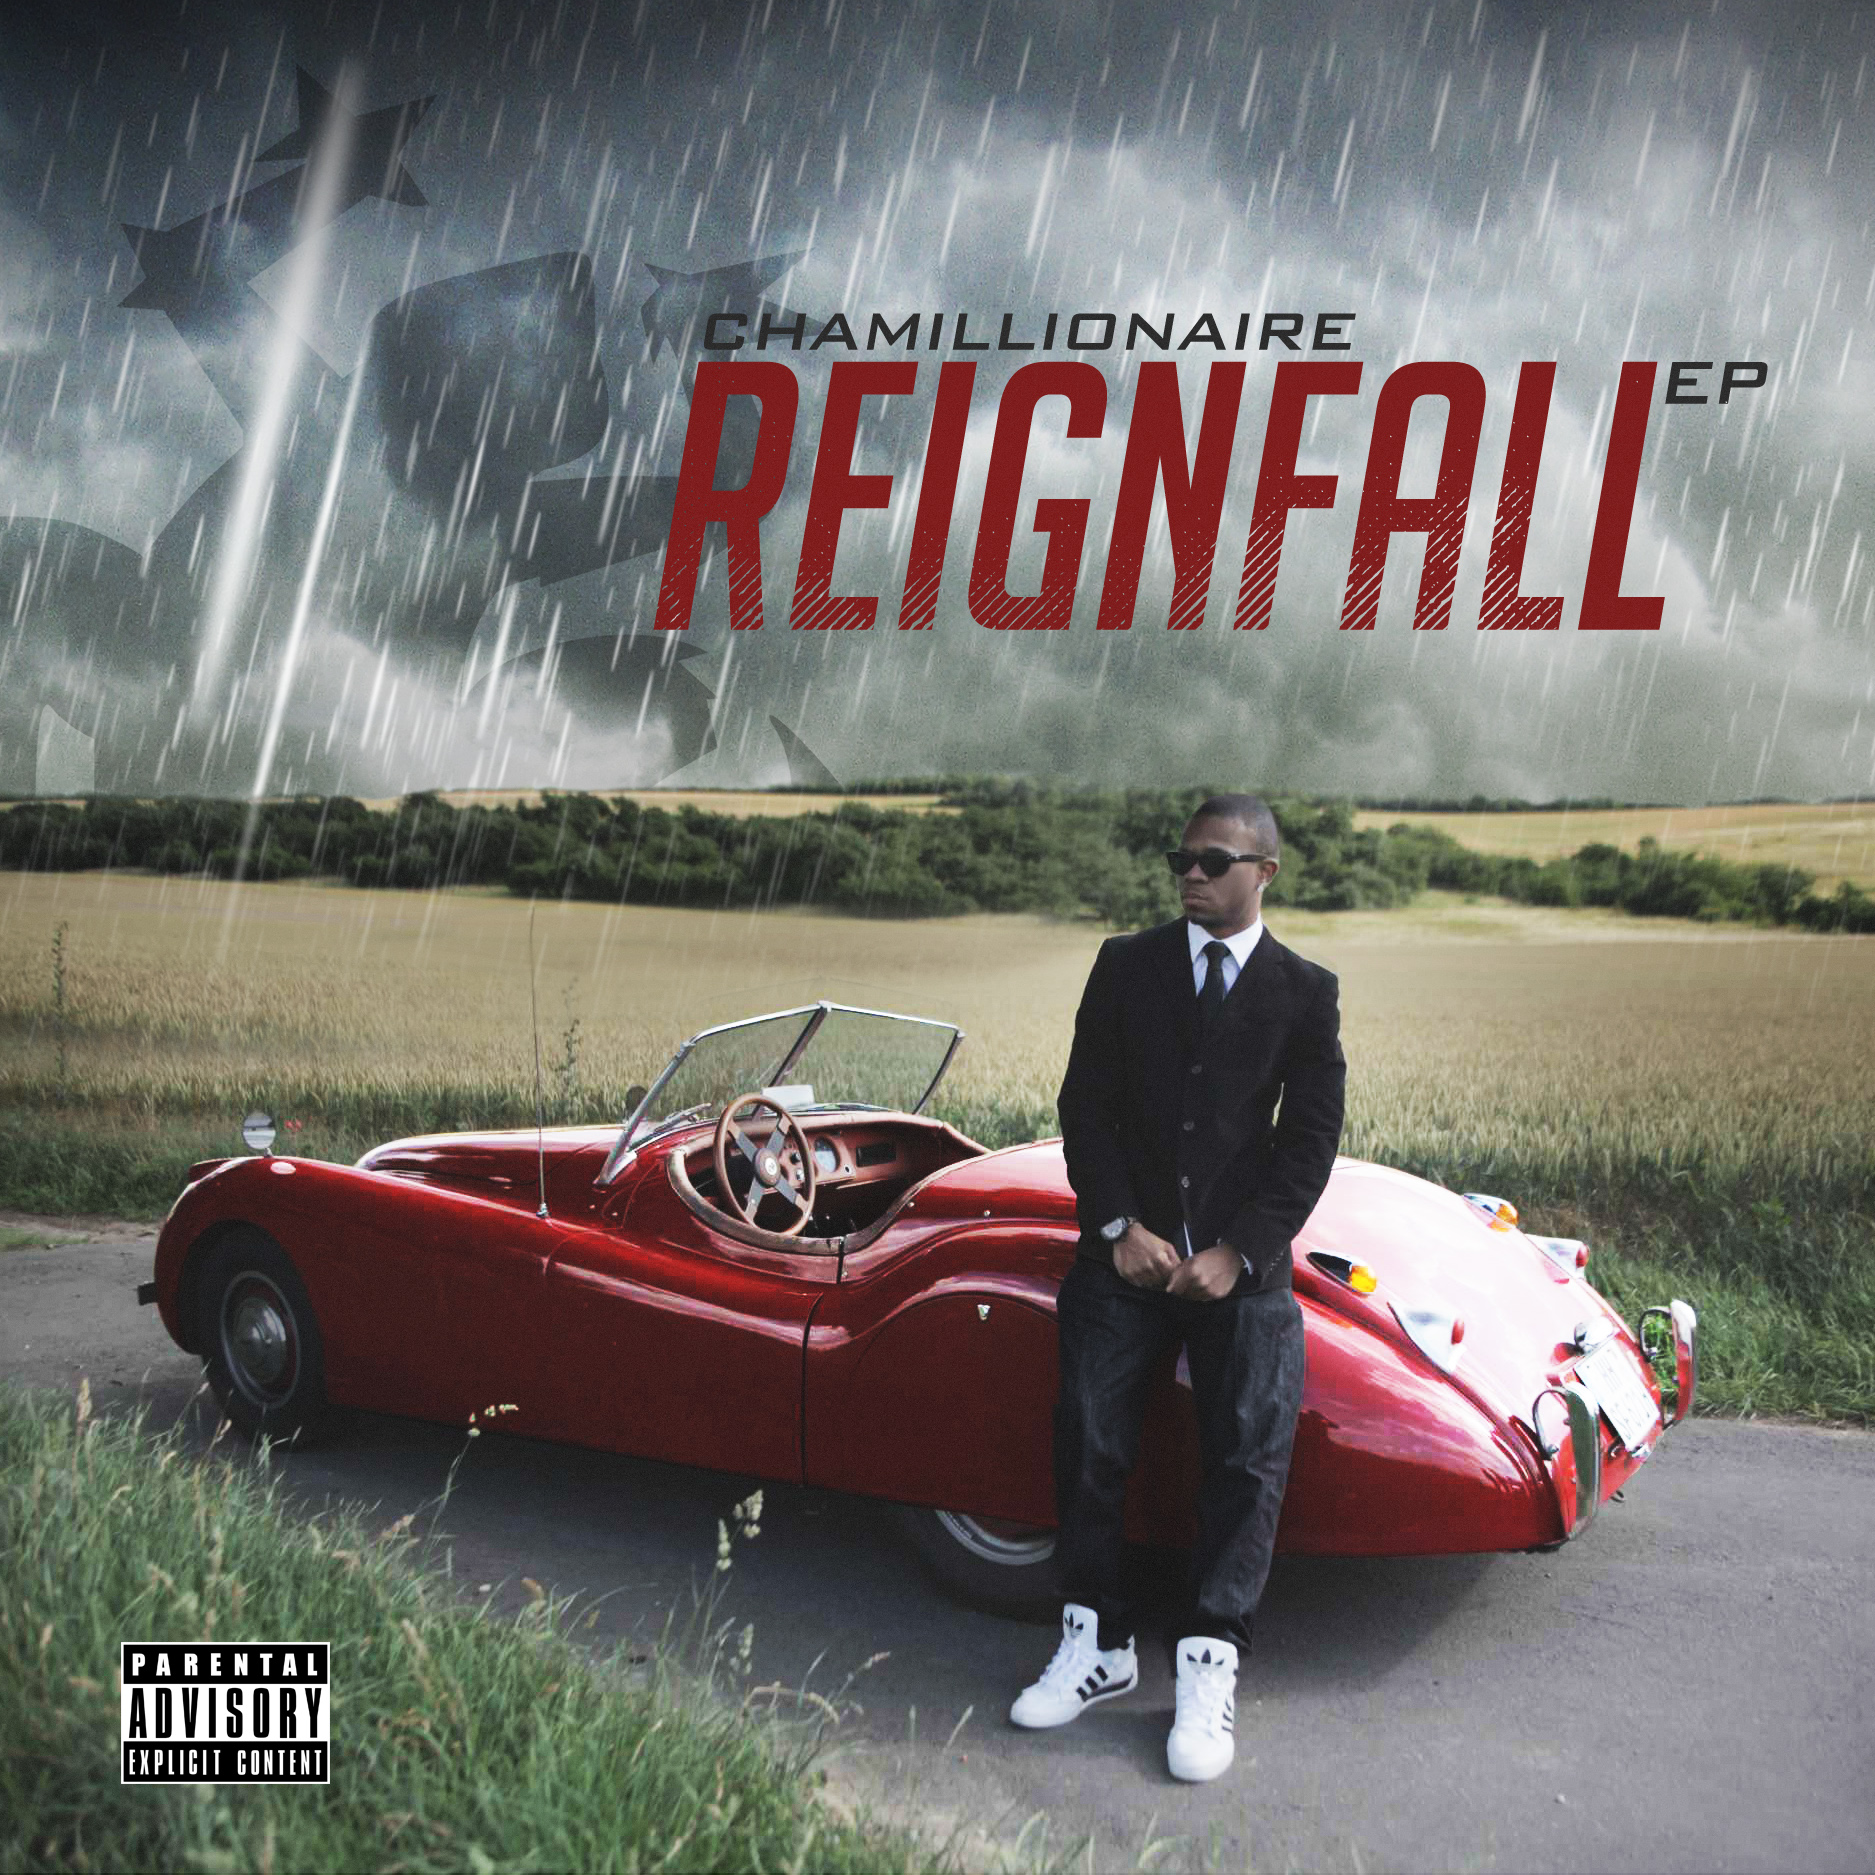 News Added Jun 17, 2013 The REIGNFALL EP will release on JULY 23RD 2013. I have set the release date back about a week further than in the past to allow more time to get all of the pre-orders packaged and ready to be shipped. All of these new chamillionaire.com EP orders will be shipped […]